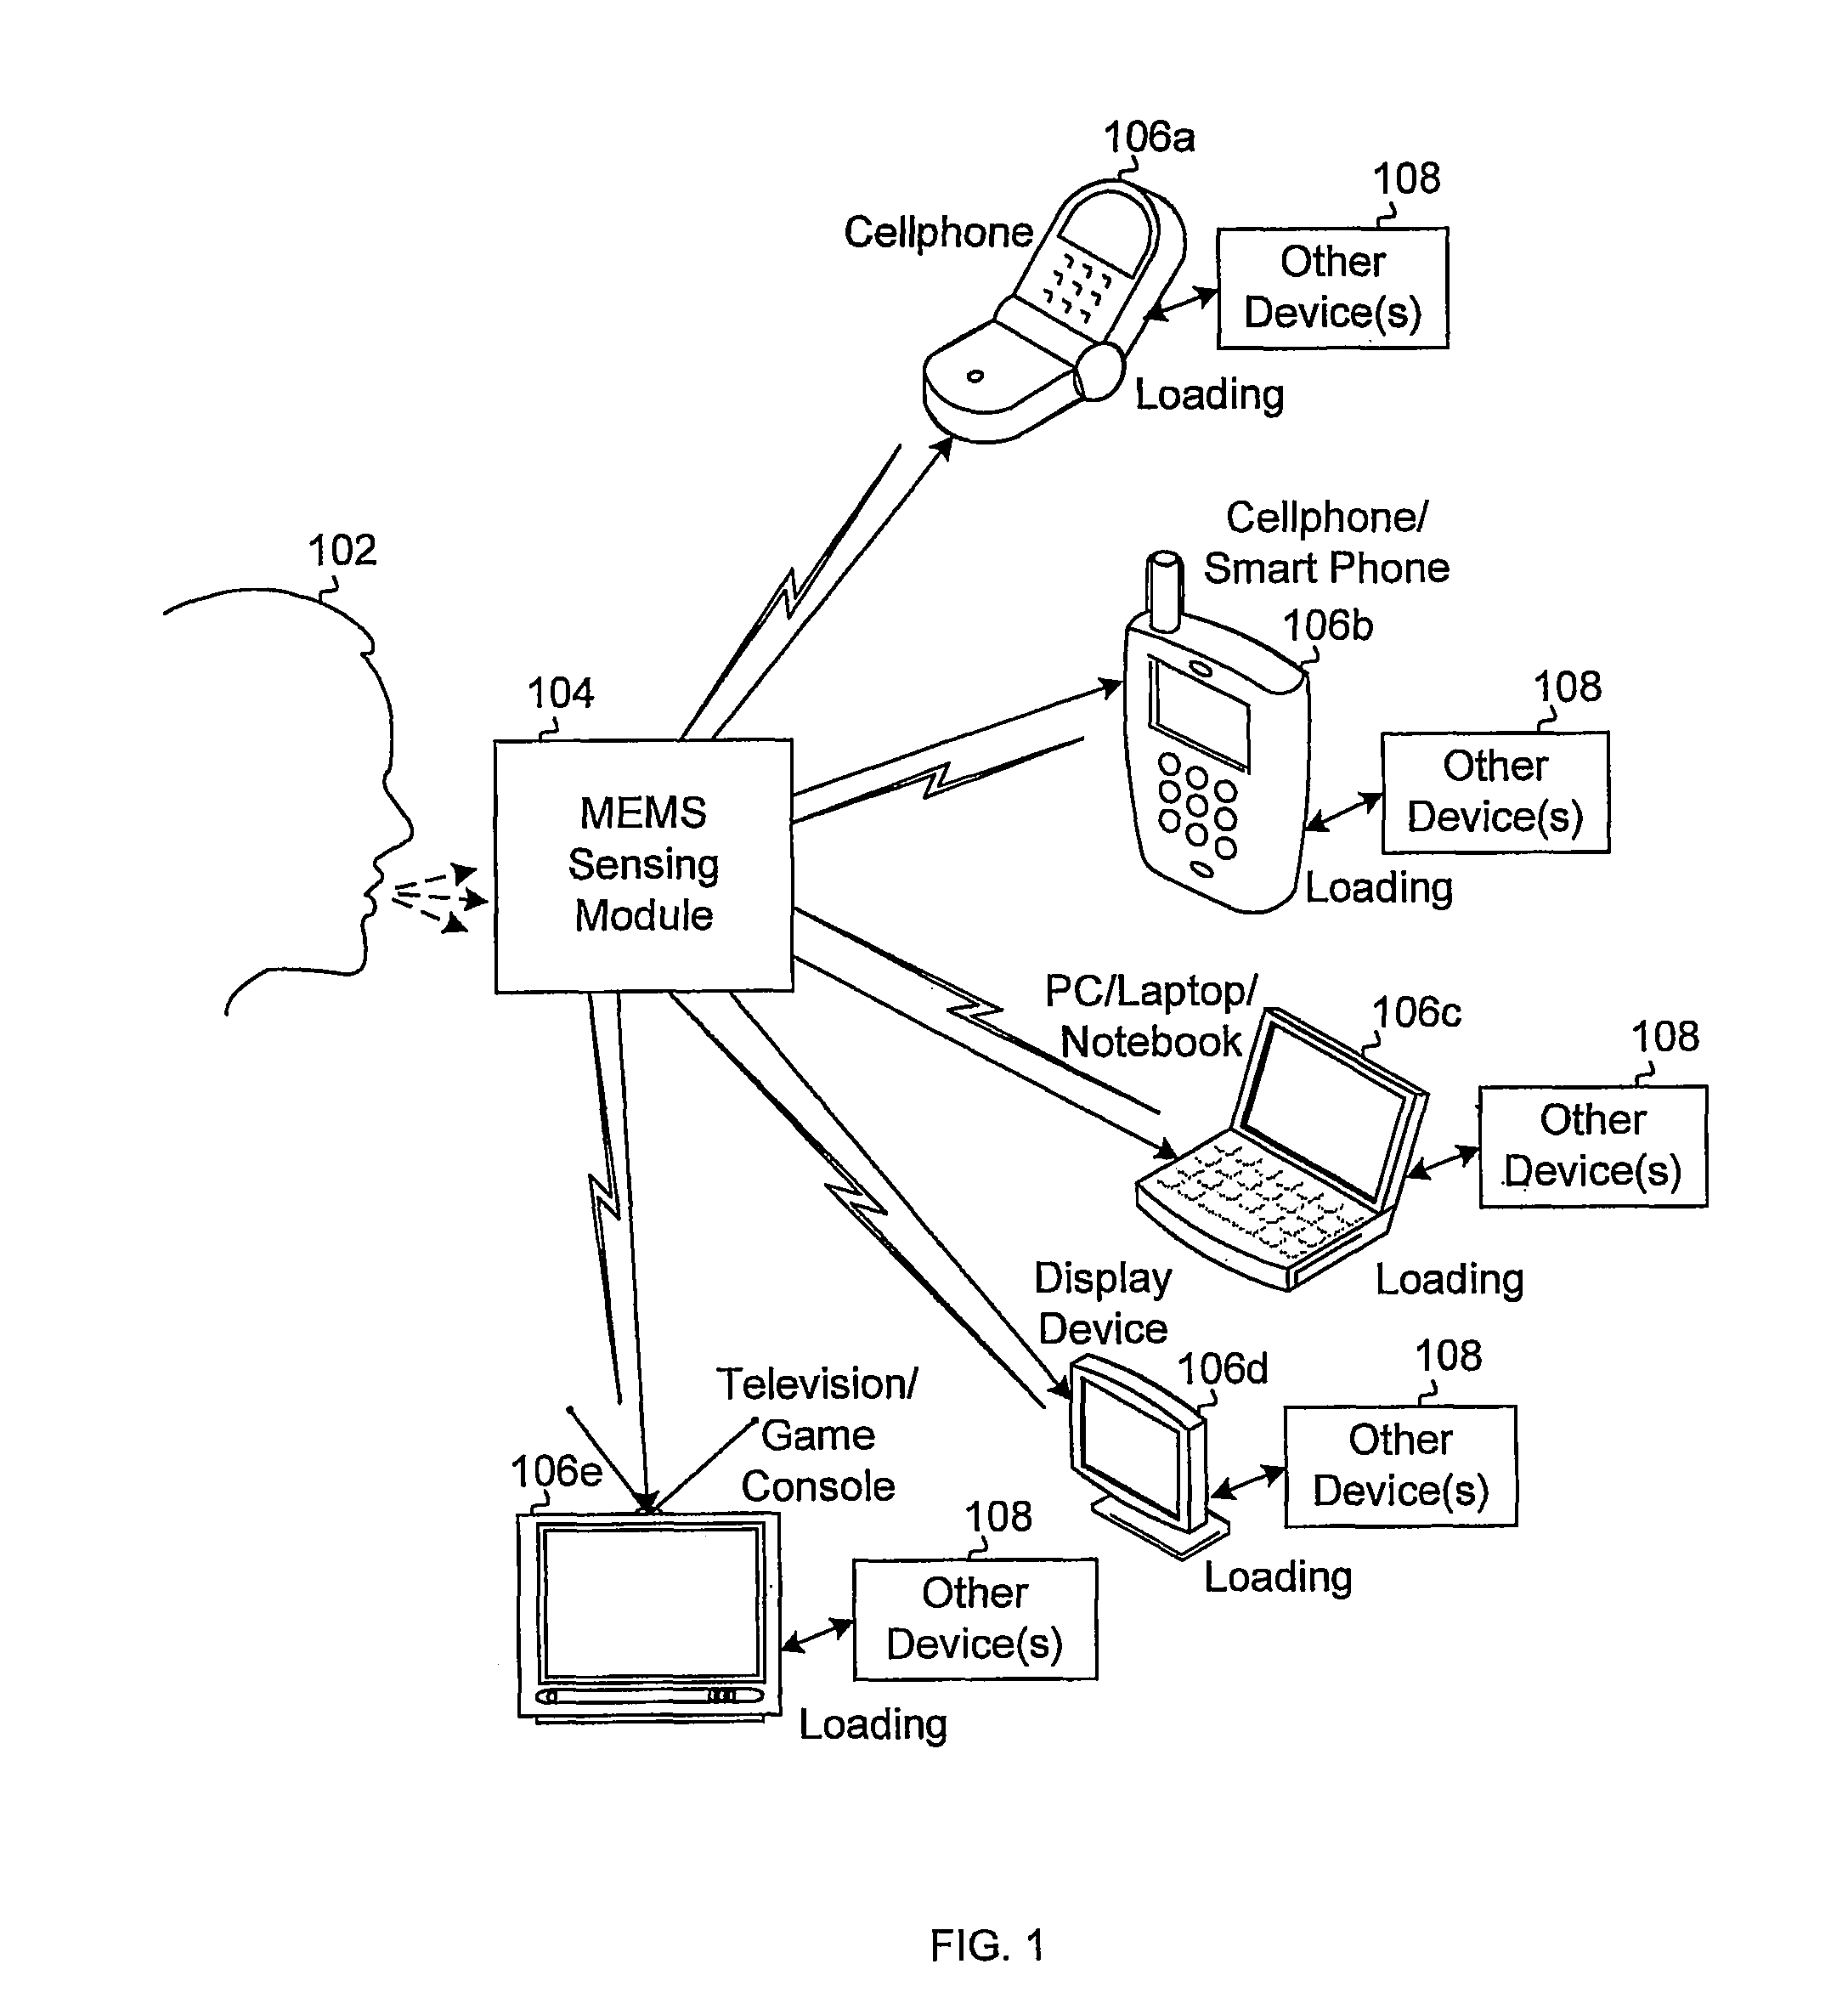 Method and system for providing a user interface that enables control of a device via respiratory and/or tactual input